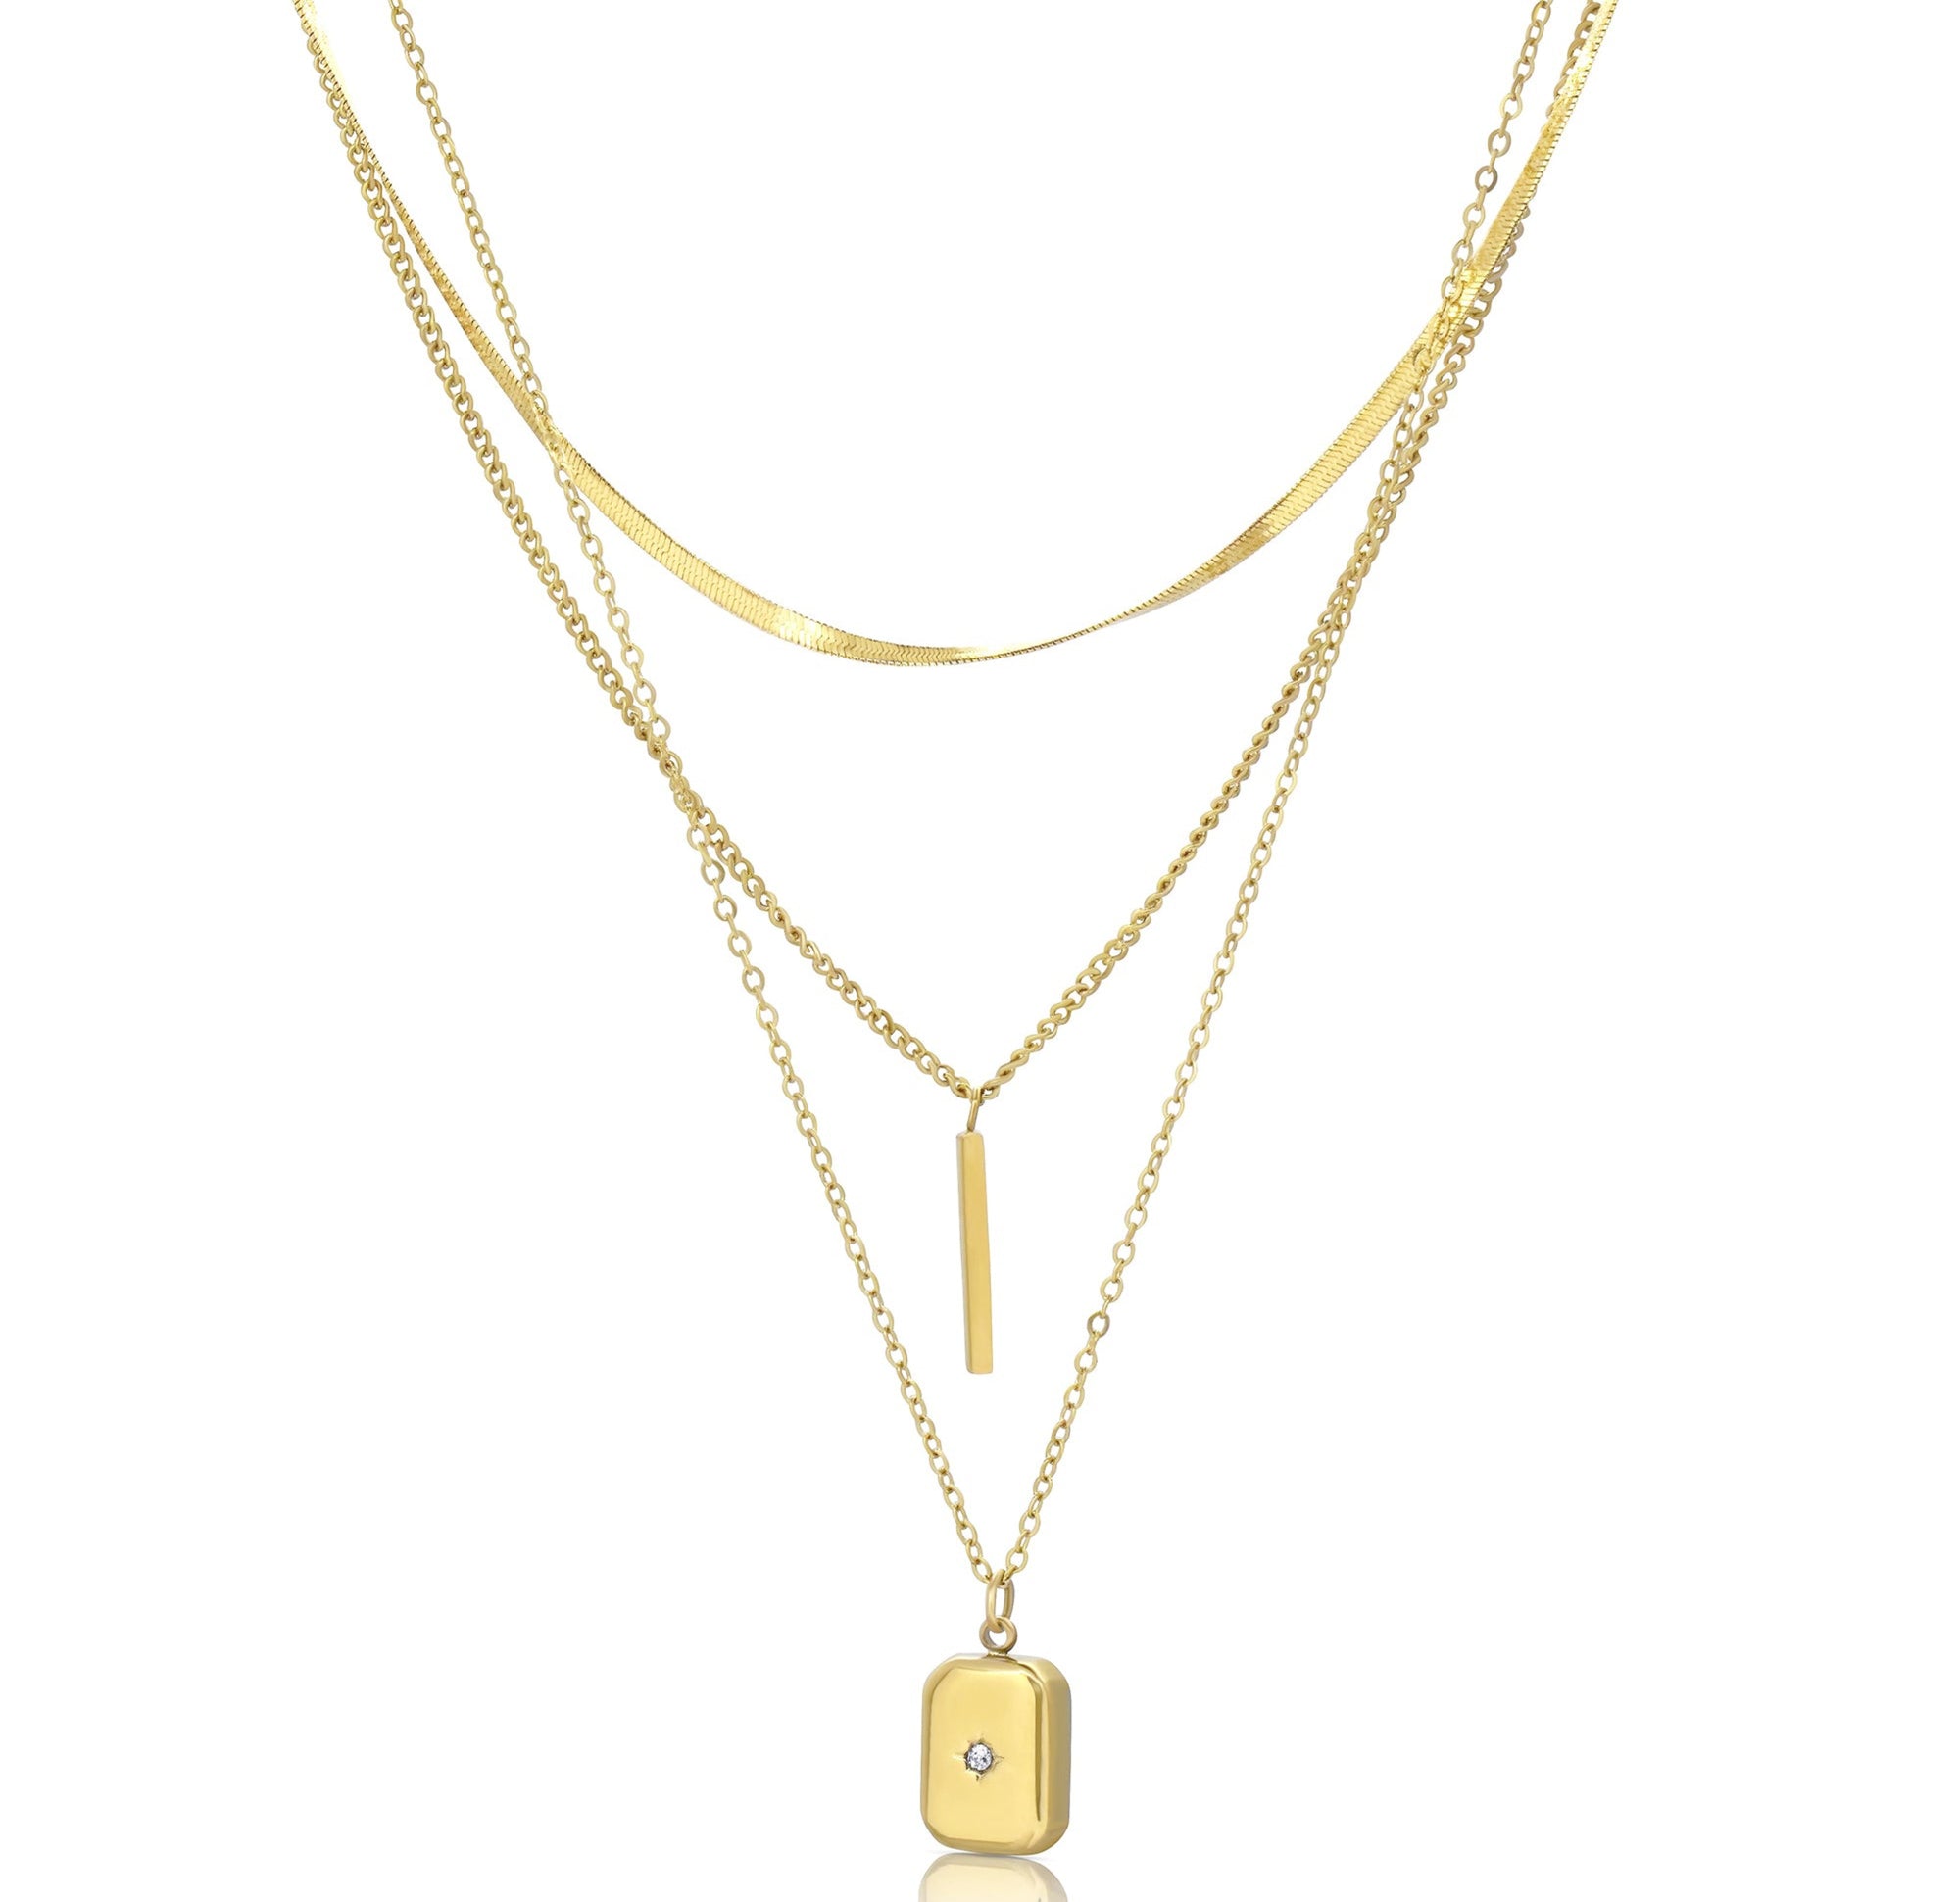 gold layer chain necklace waterproof jewelry